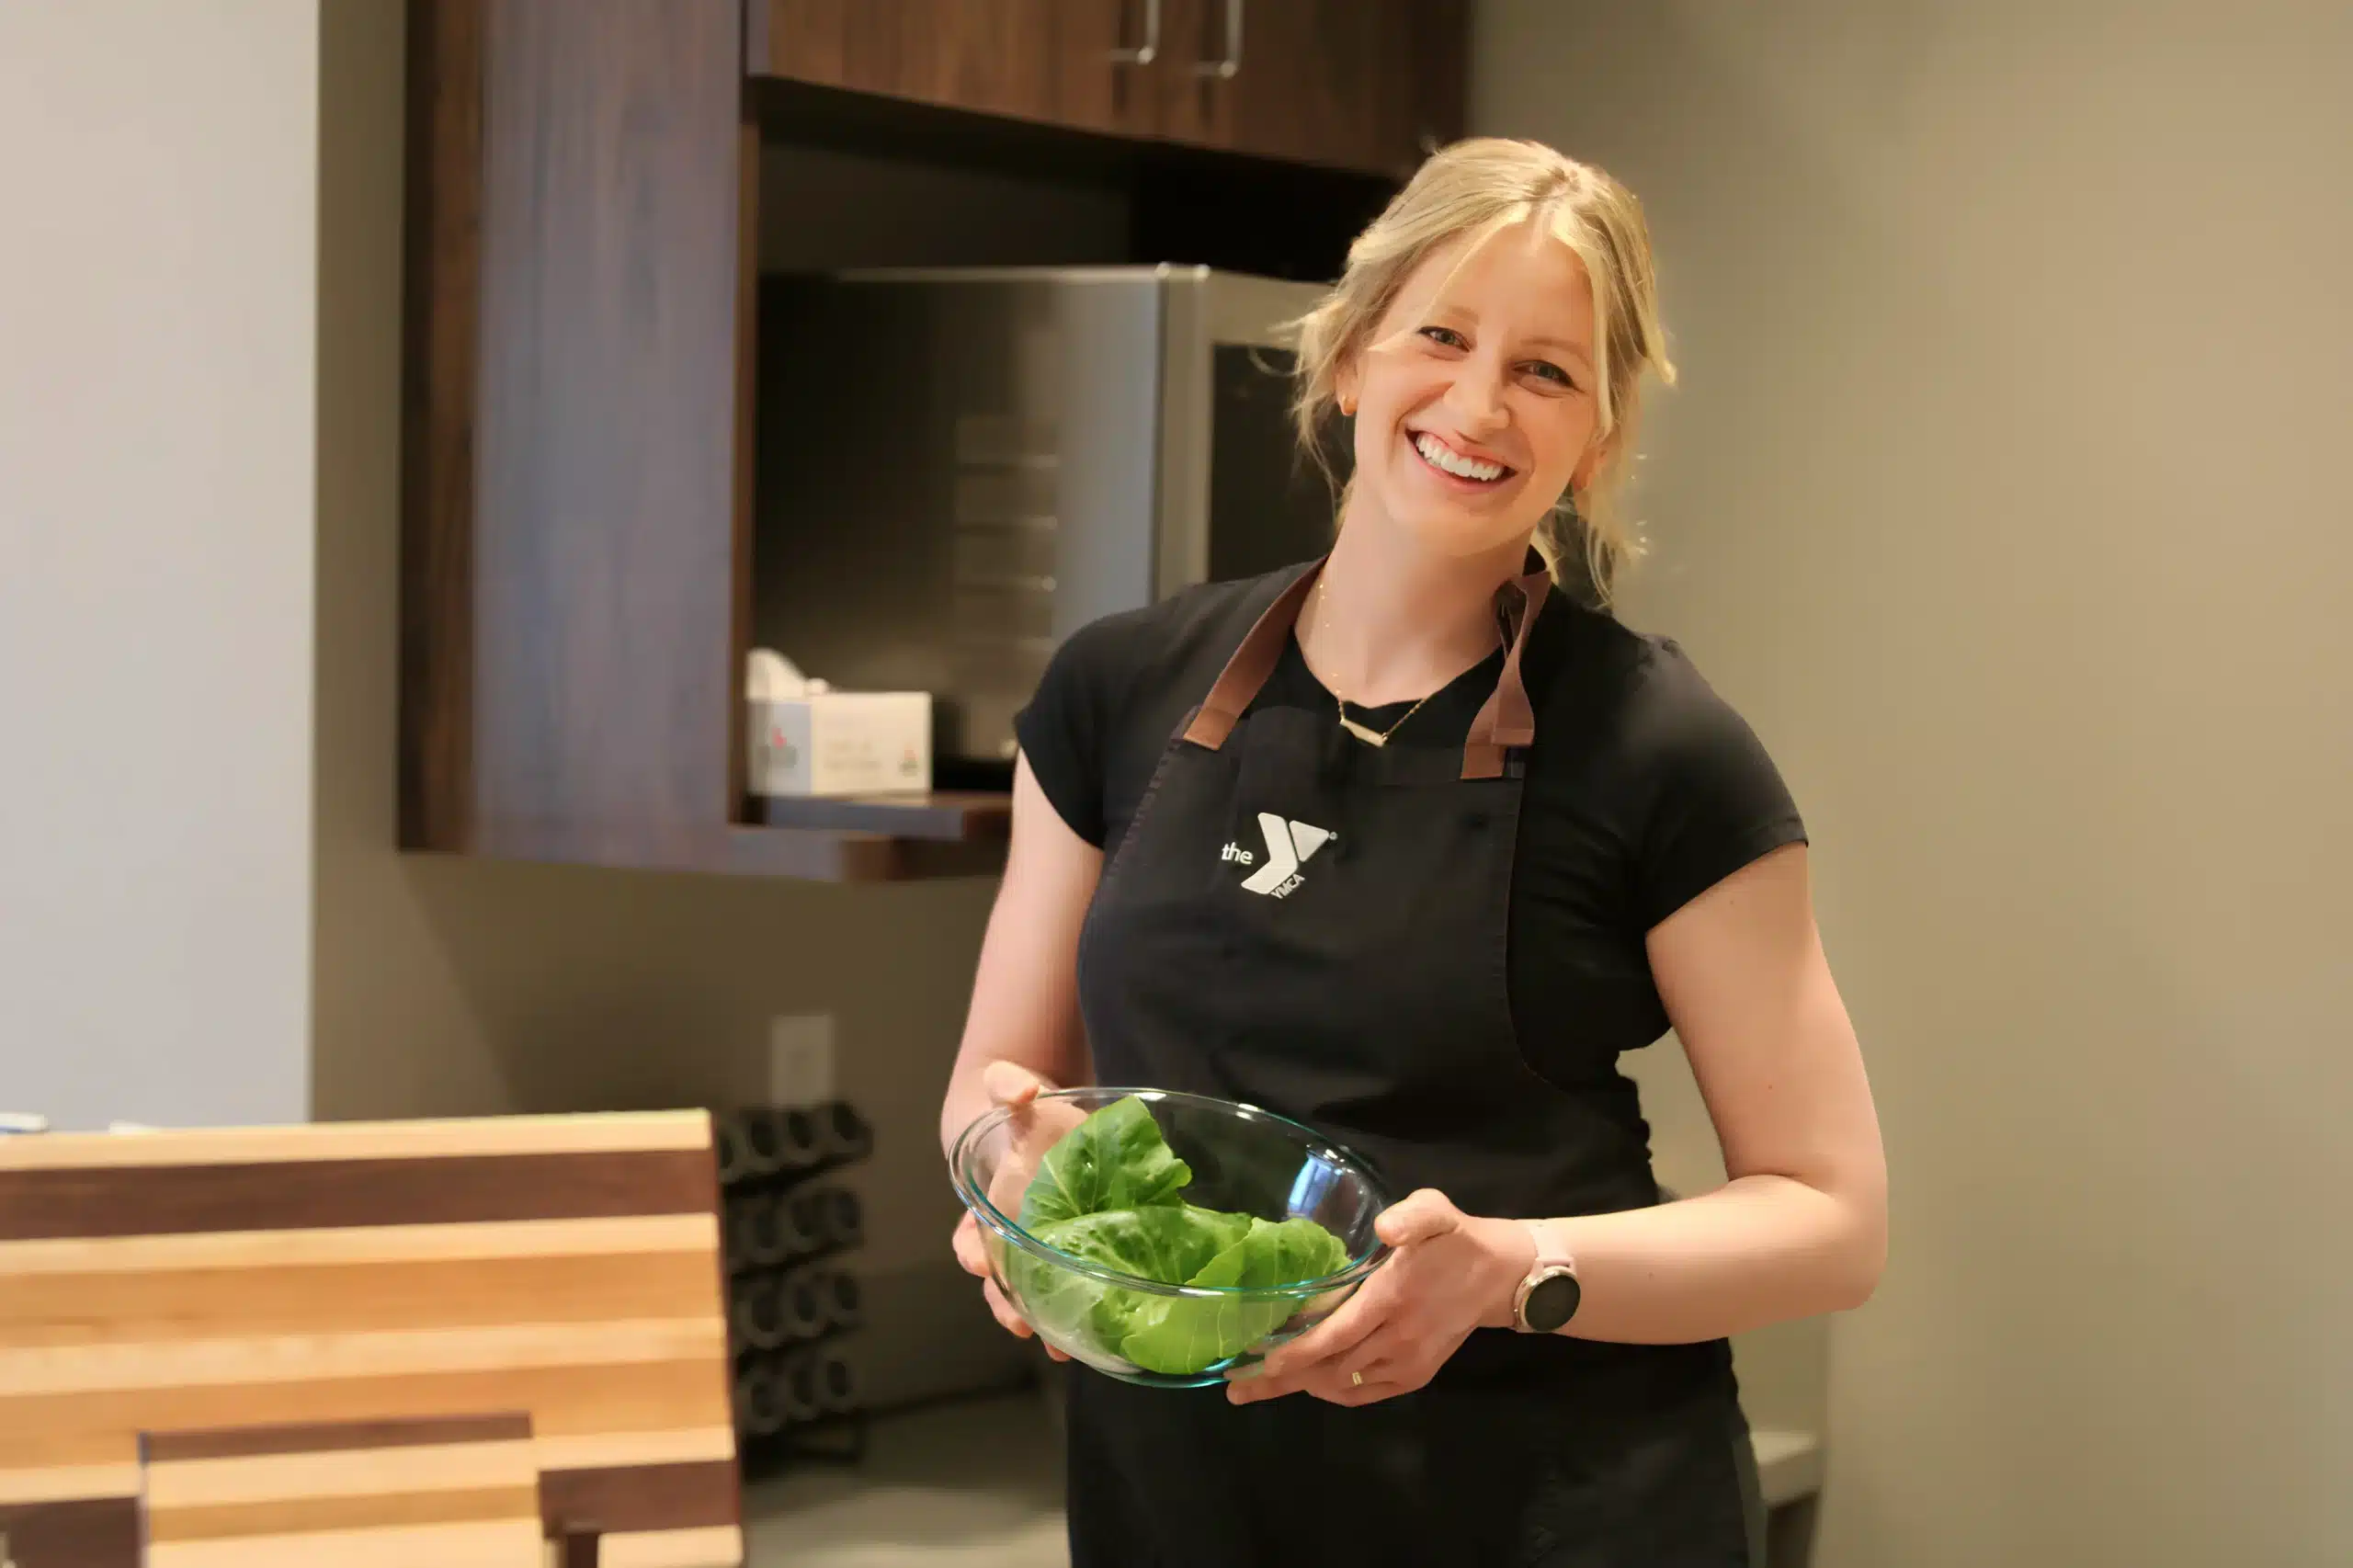 A woman with a joyful expression stands in a modern kitchen, holding a clear bowl filled with fresh green leaves. She is wearing a black apron with the YMCA logo on it. The kitchen setting is sleek and minimalistic, featuring wooden furnishings and neutral tones.